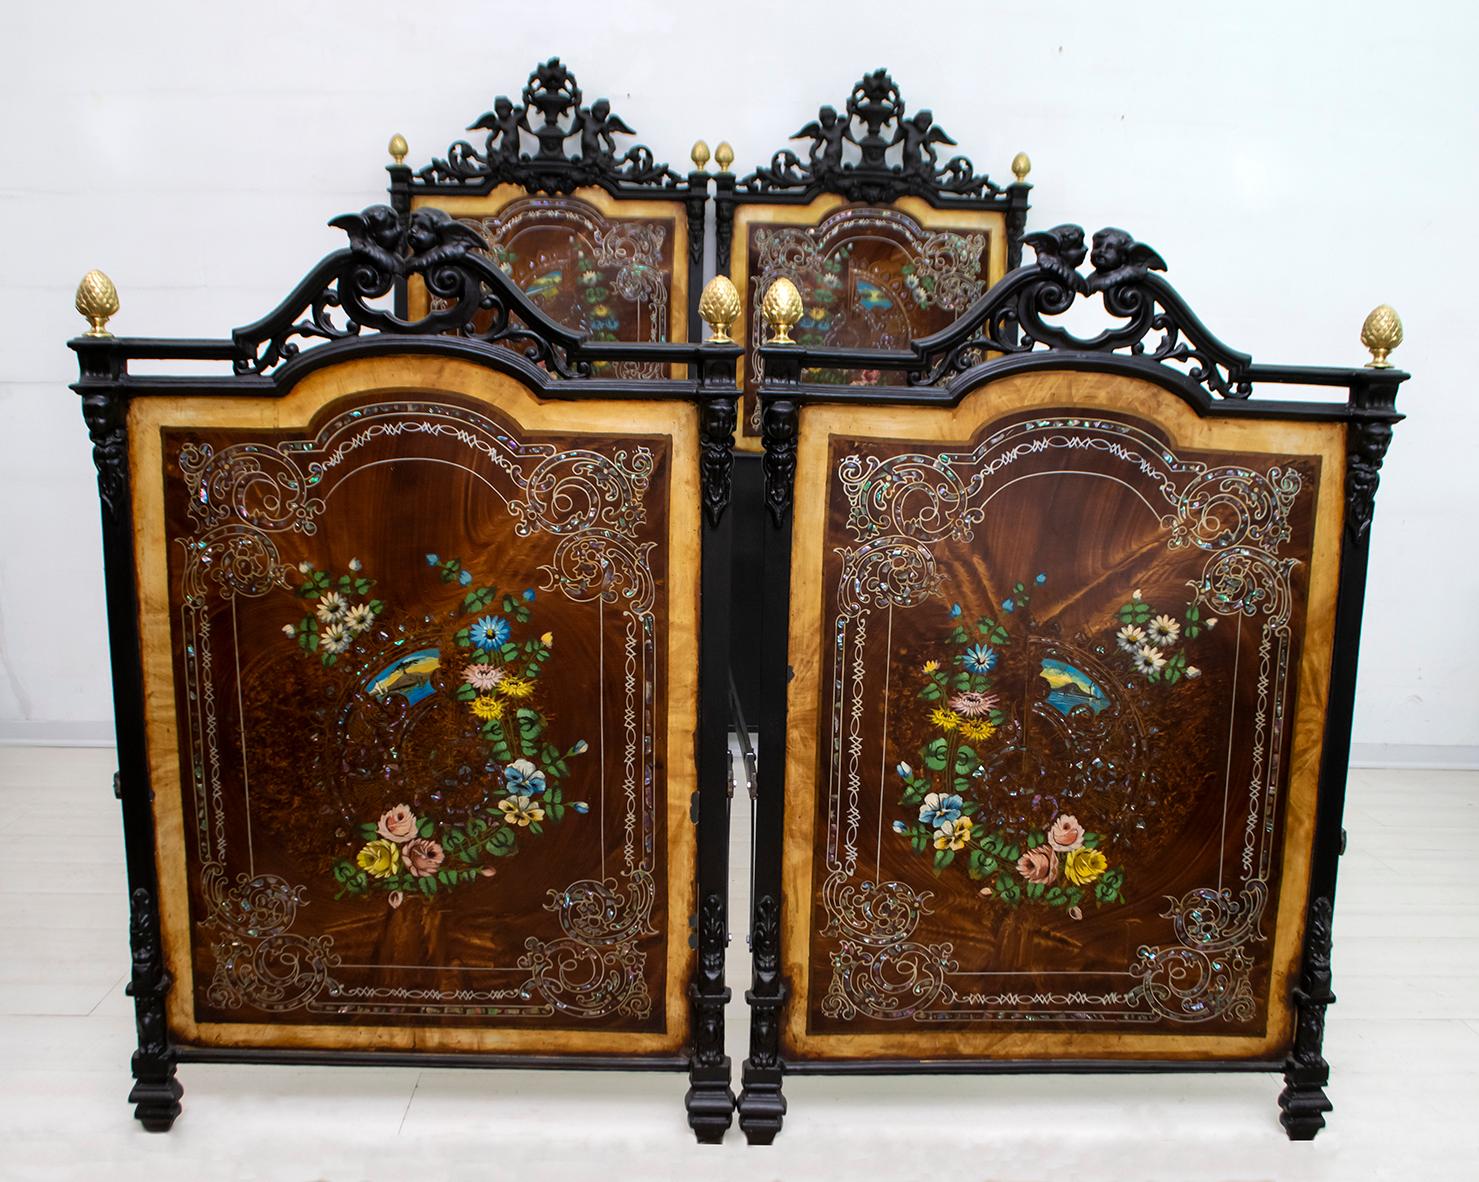 Beautiful pair of Italian Art Nouveau single beds. The two beds are made of iron with hand forged decorative motifs, they can be joined to form a double bed of European size. The panels have a refined hand painted floral decoration. Precious pearl